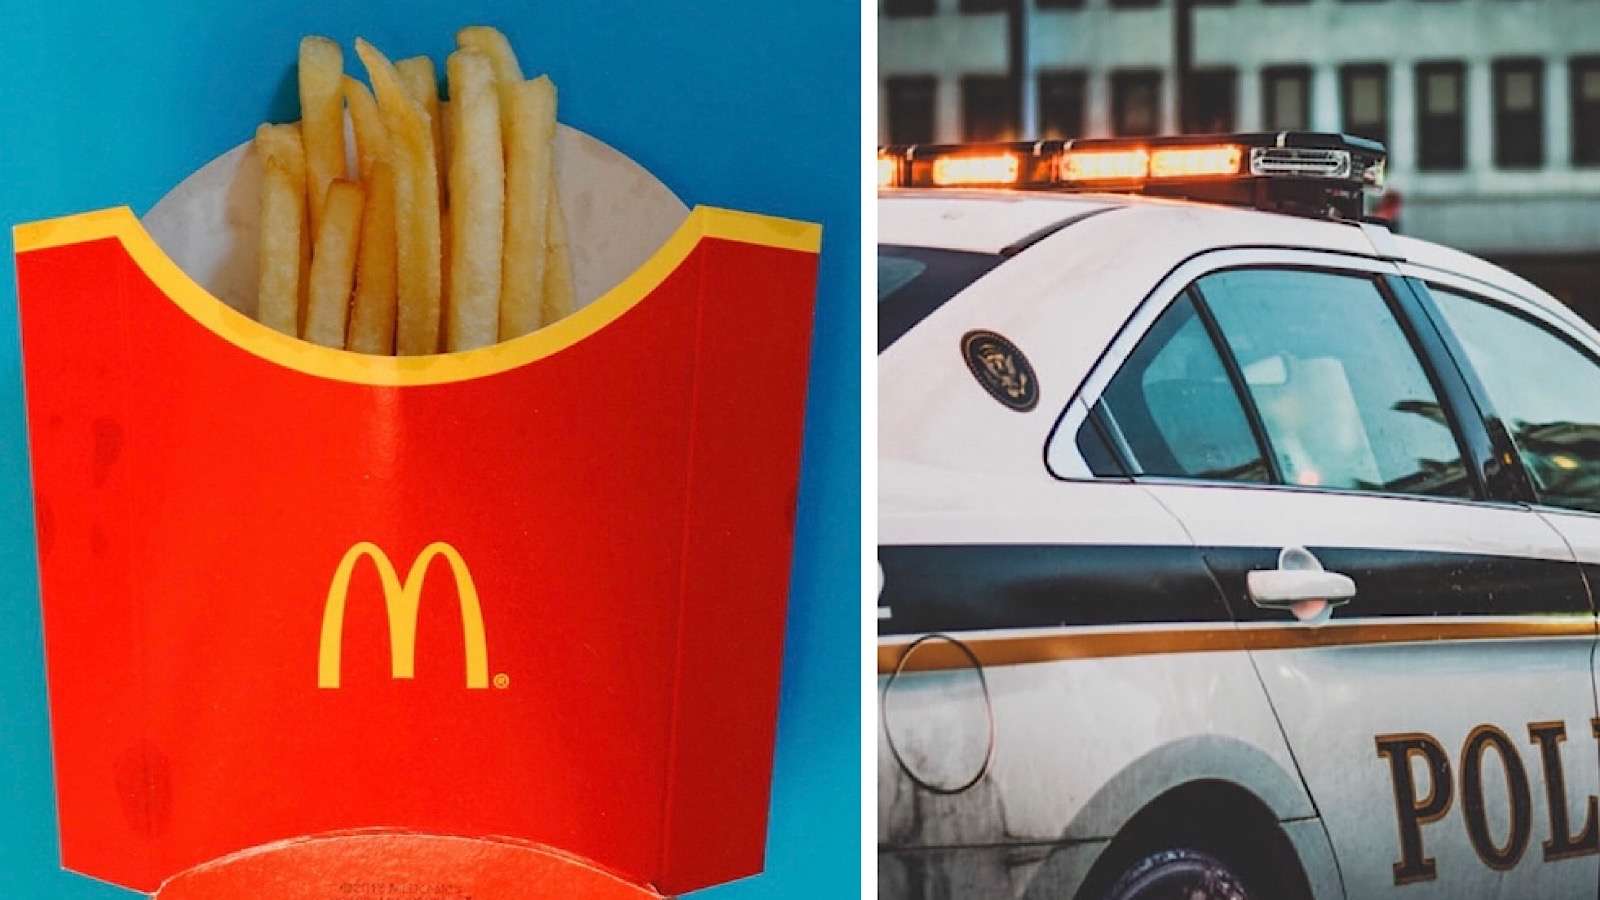 truck drivers arrested over McDonald's french fry dispute